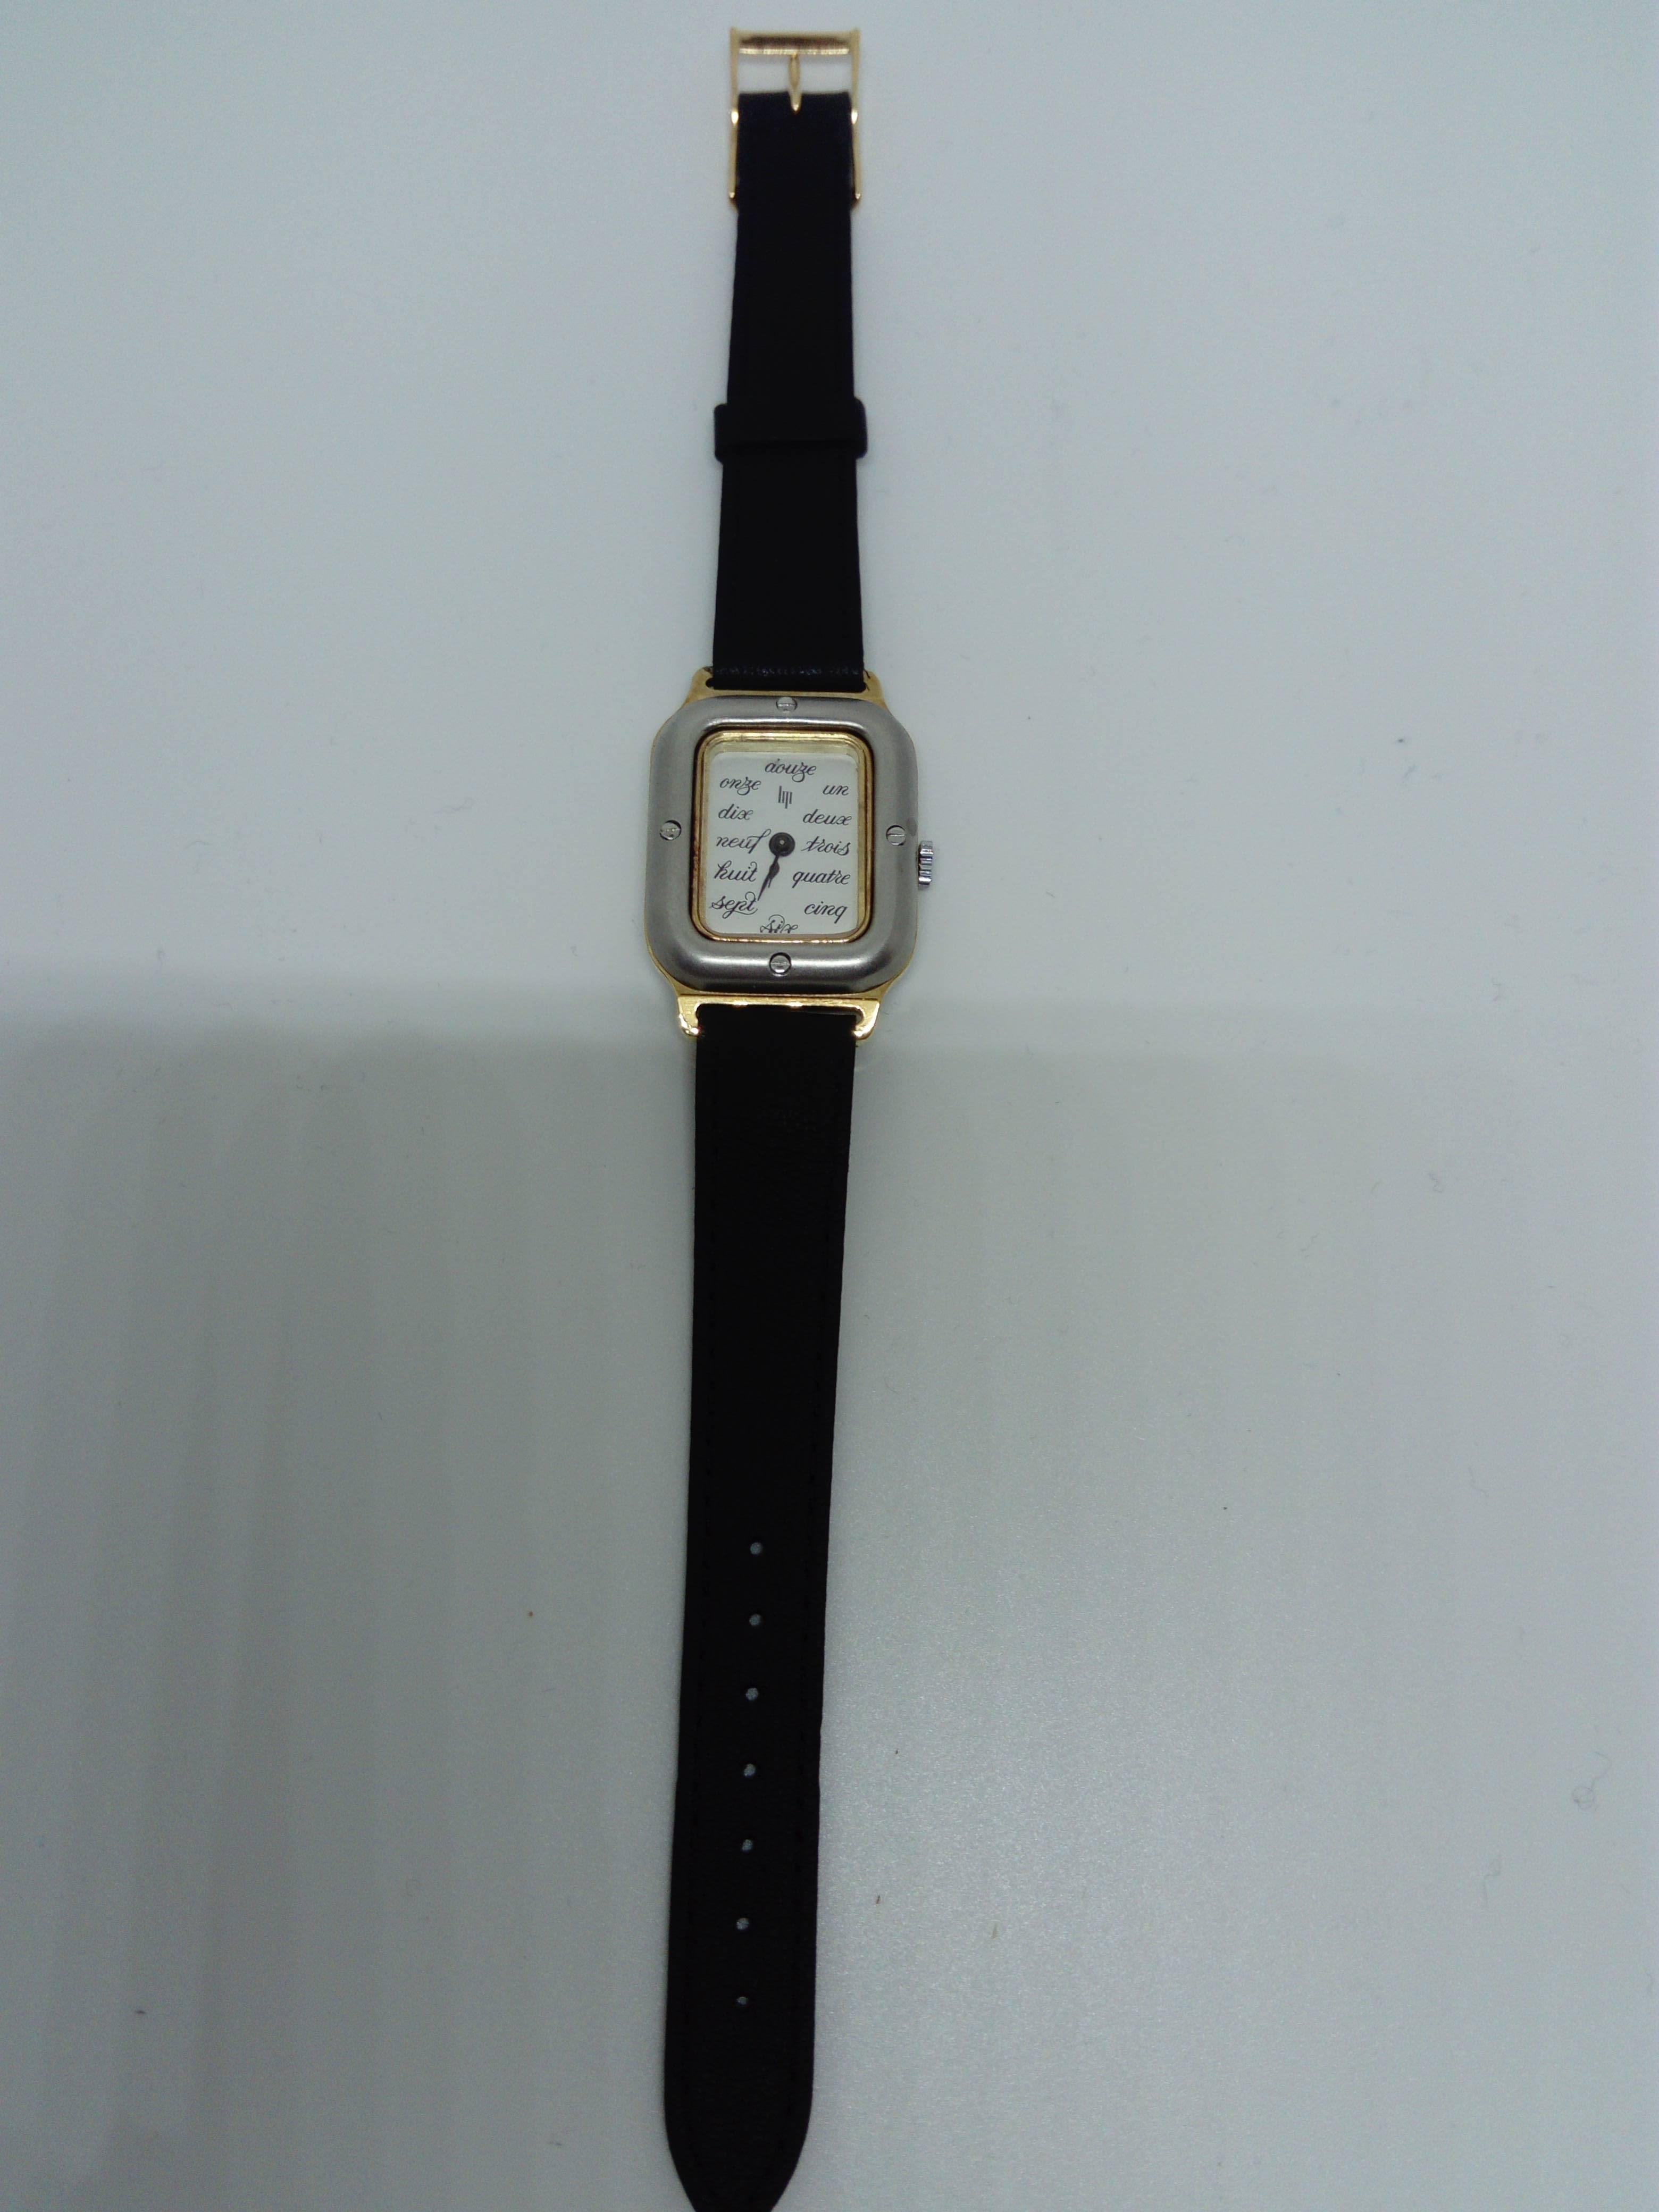 Lip
Design watch, Marc Held
Circa 1978
Gold and steel. Leather strap.
New from stock
25 x 32 mm
1 year warranty
Rare